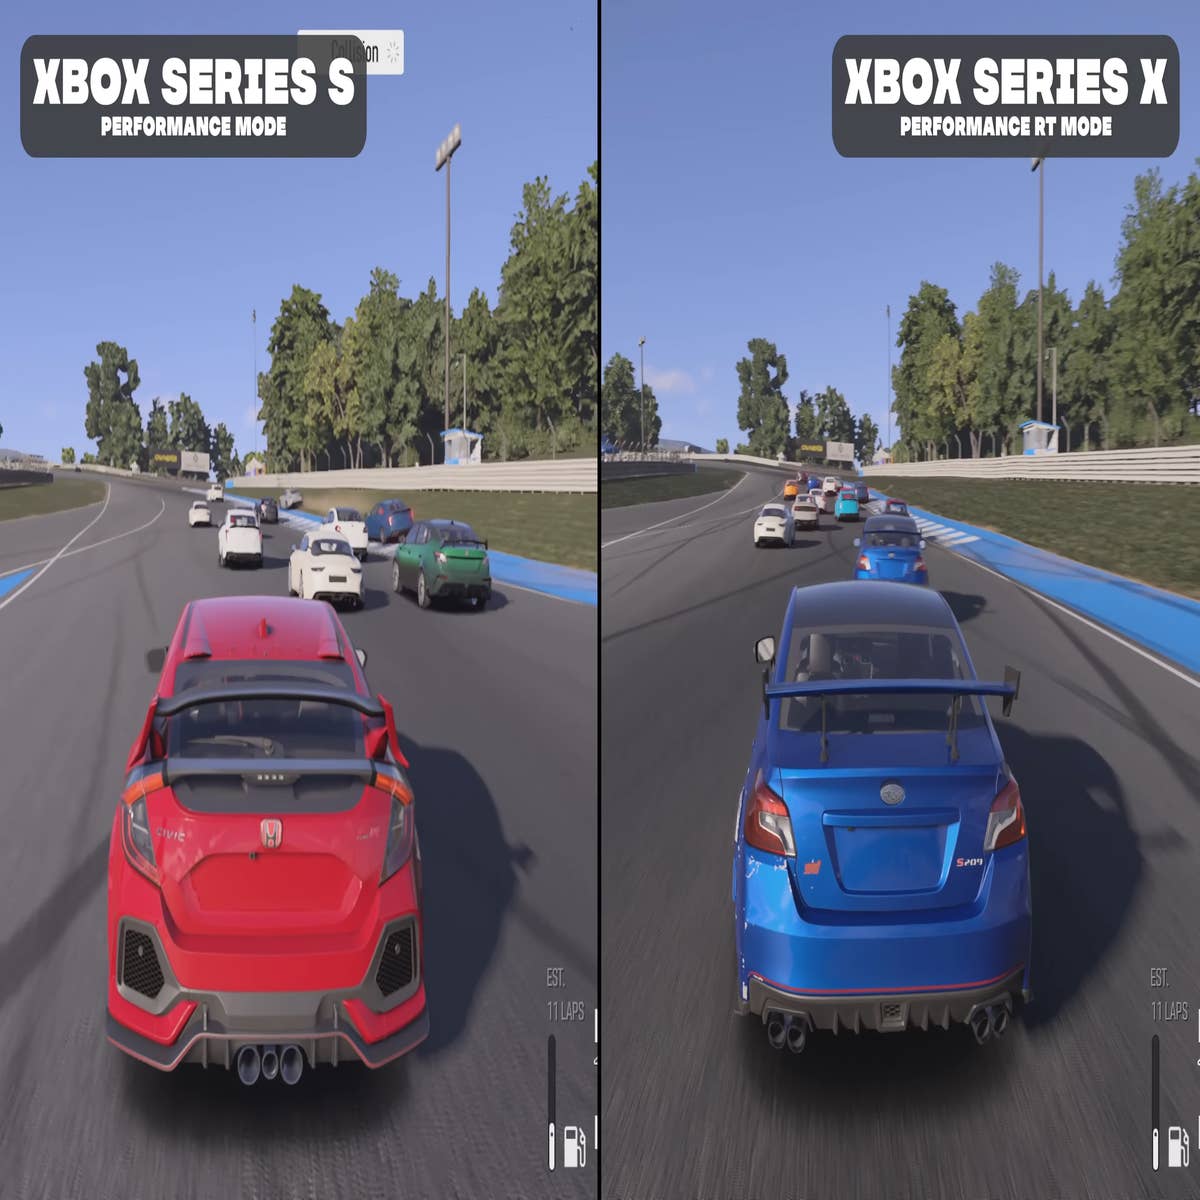 Forza Motorsport on X: Gaming is for everyone. We're grateful to